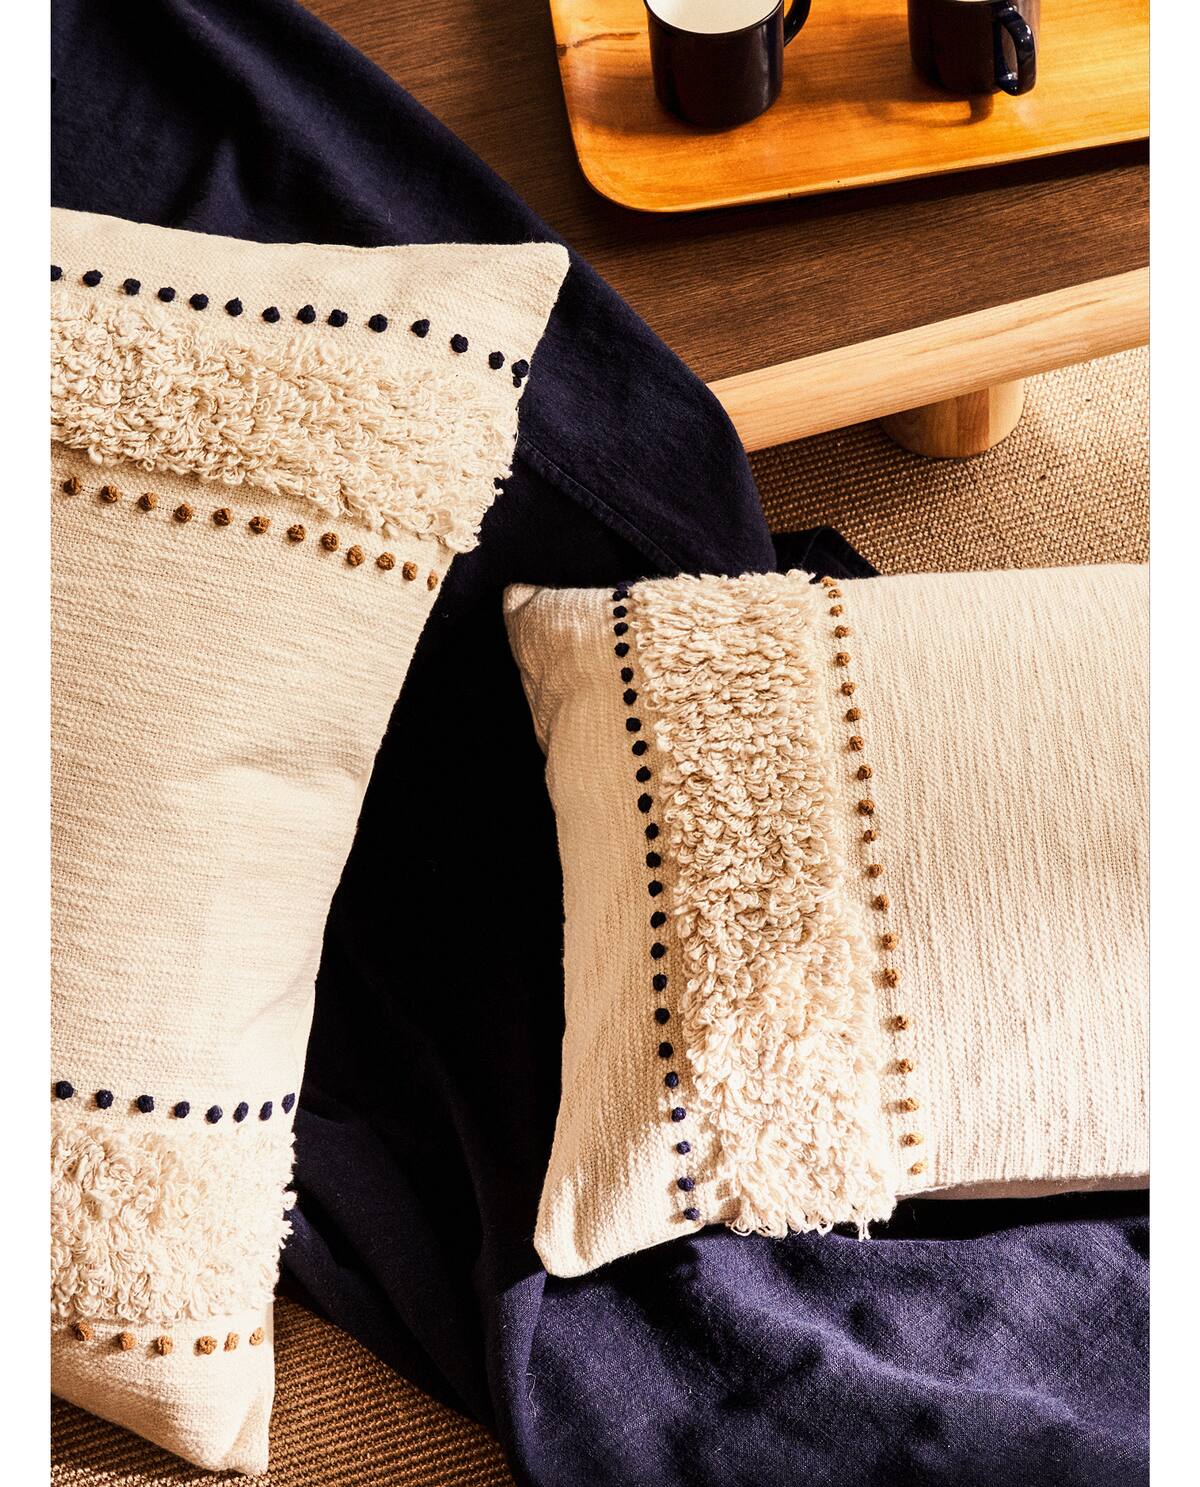 Textured pillow covers in a comfy living space